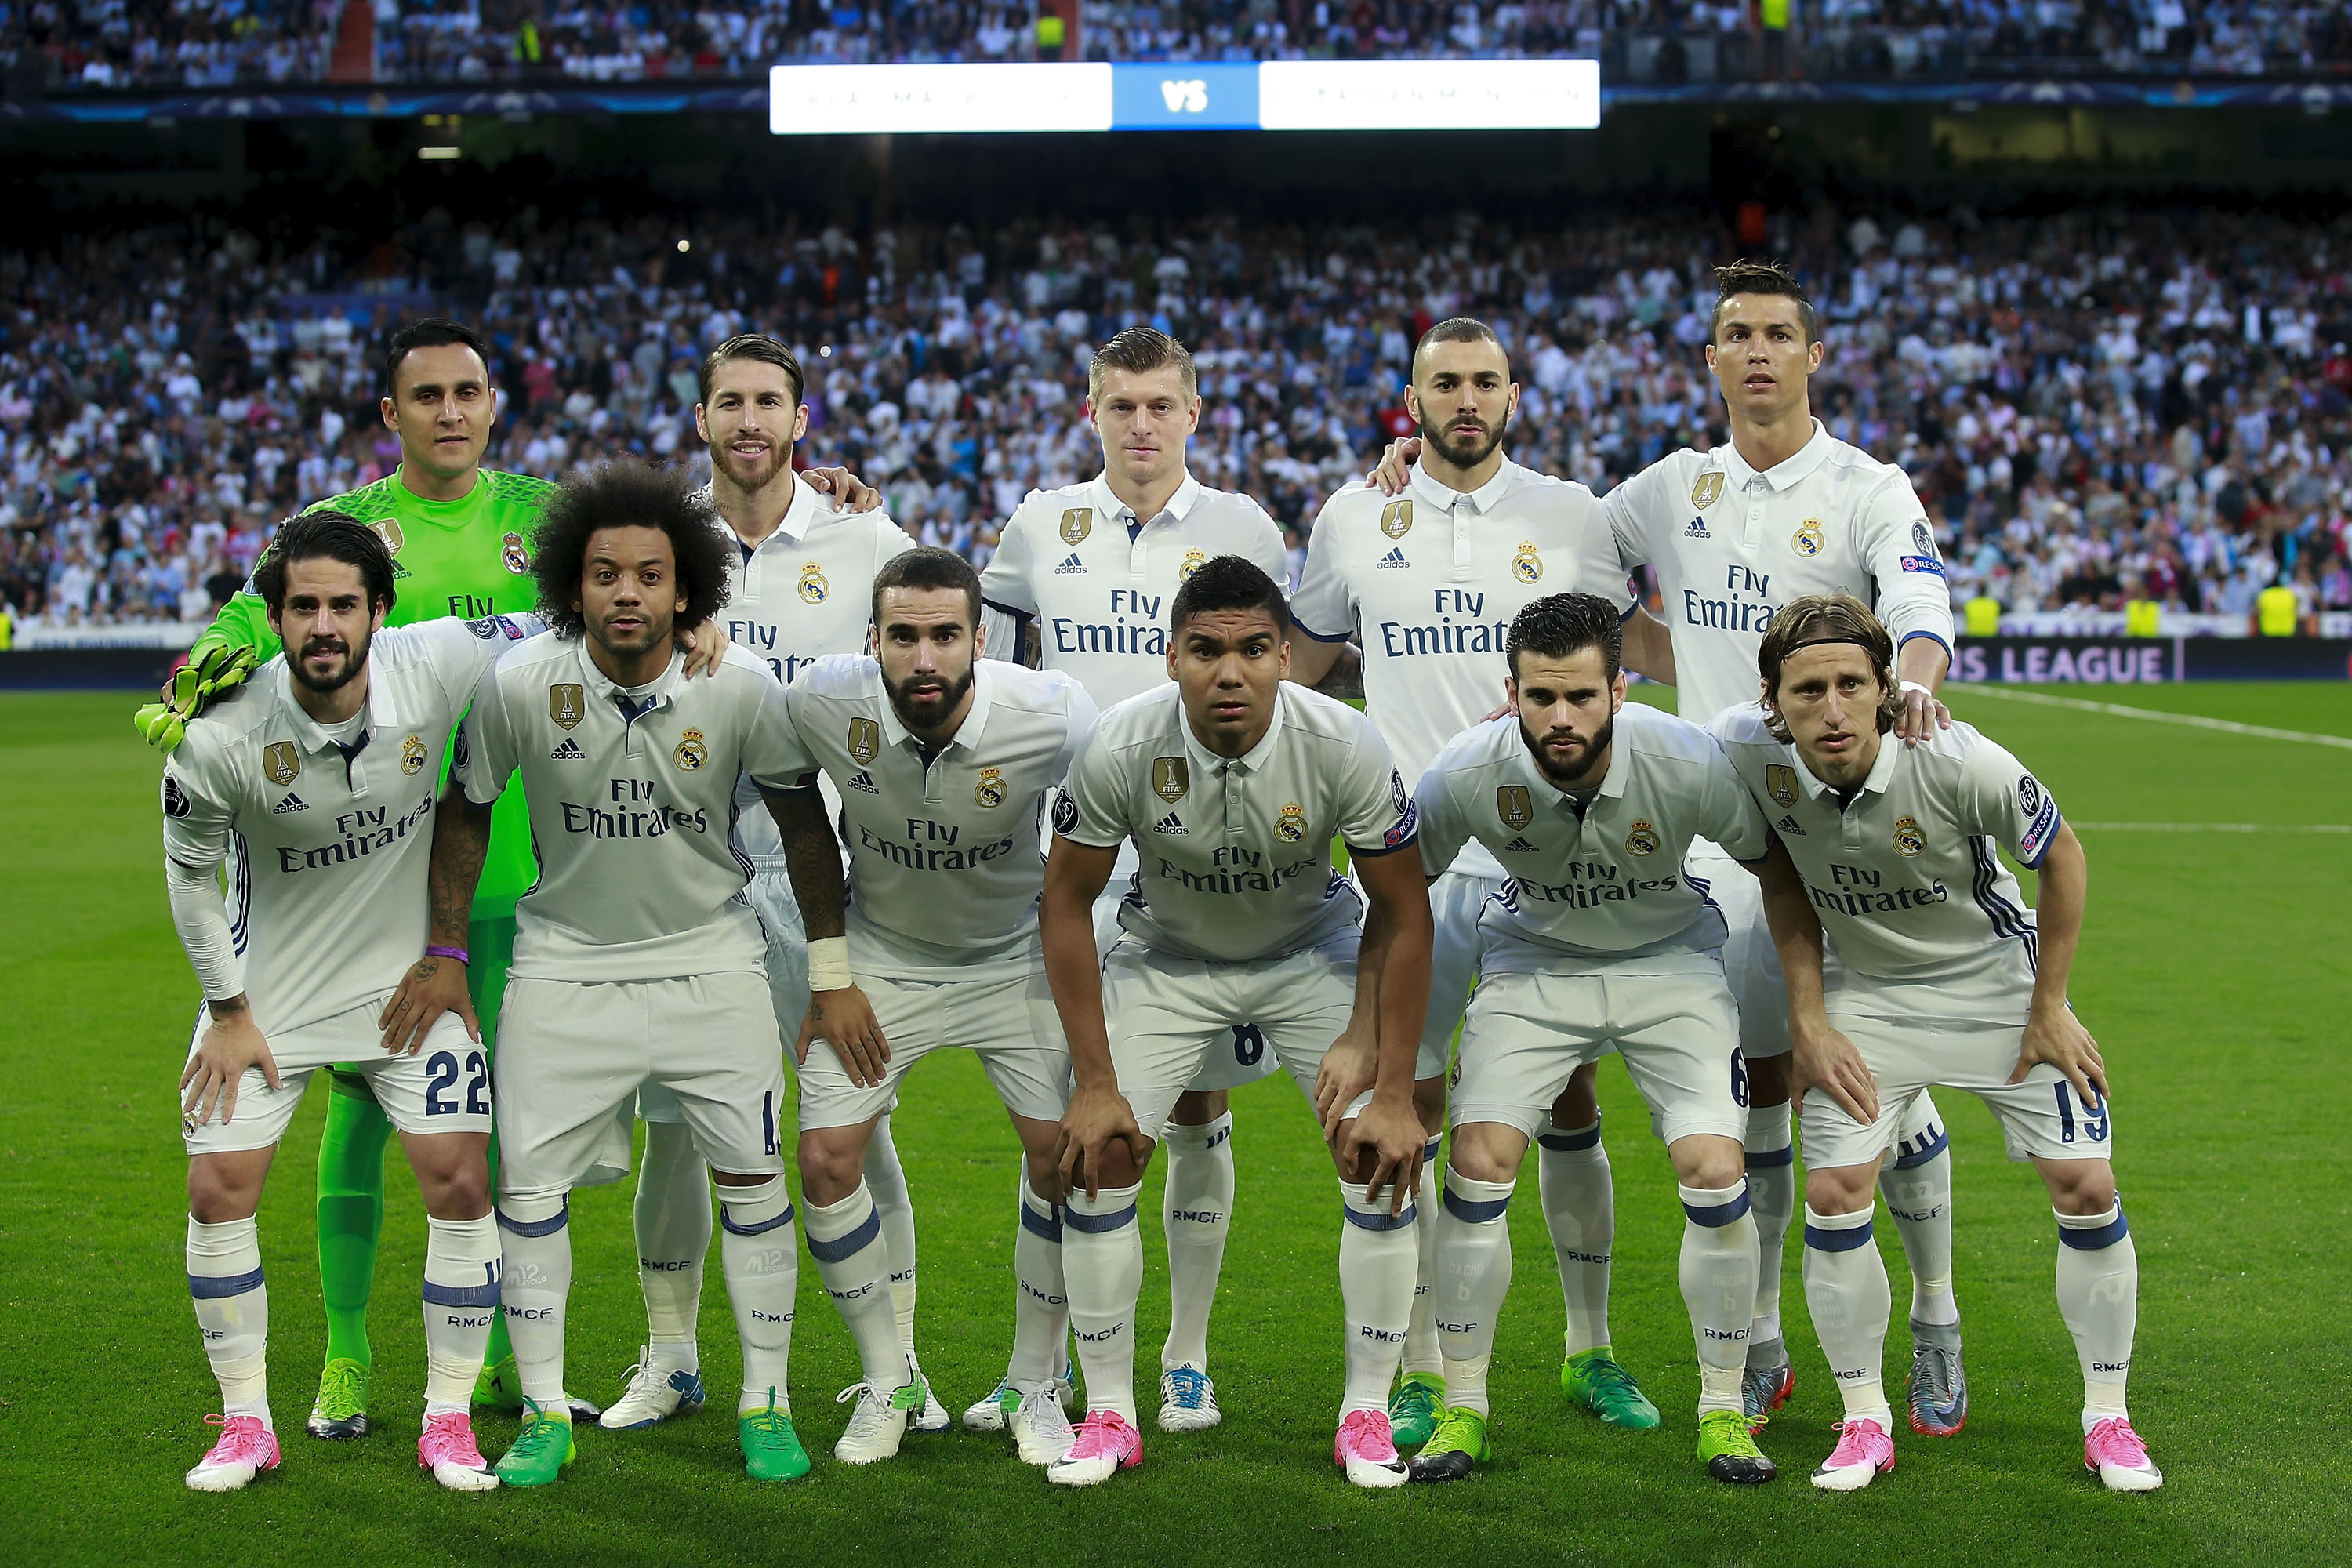 Drama as Real Madrid Abandon Team Bus For Safety Reasons